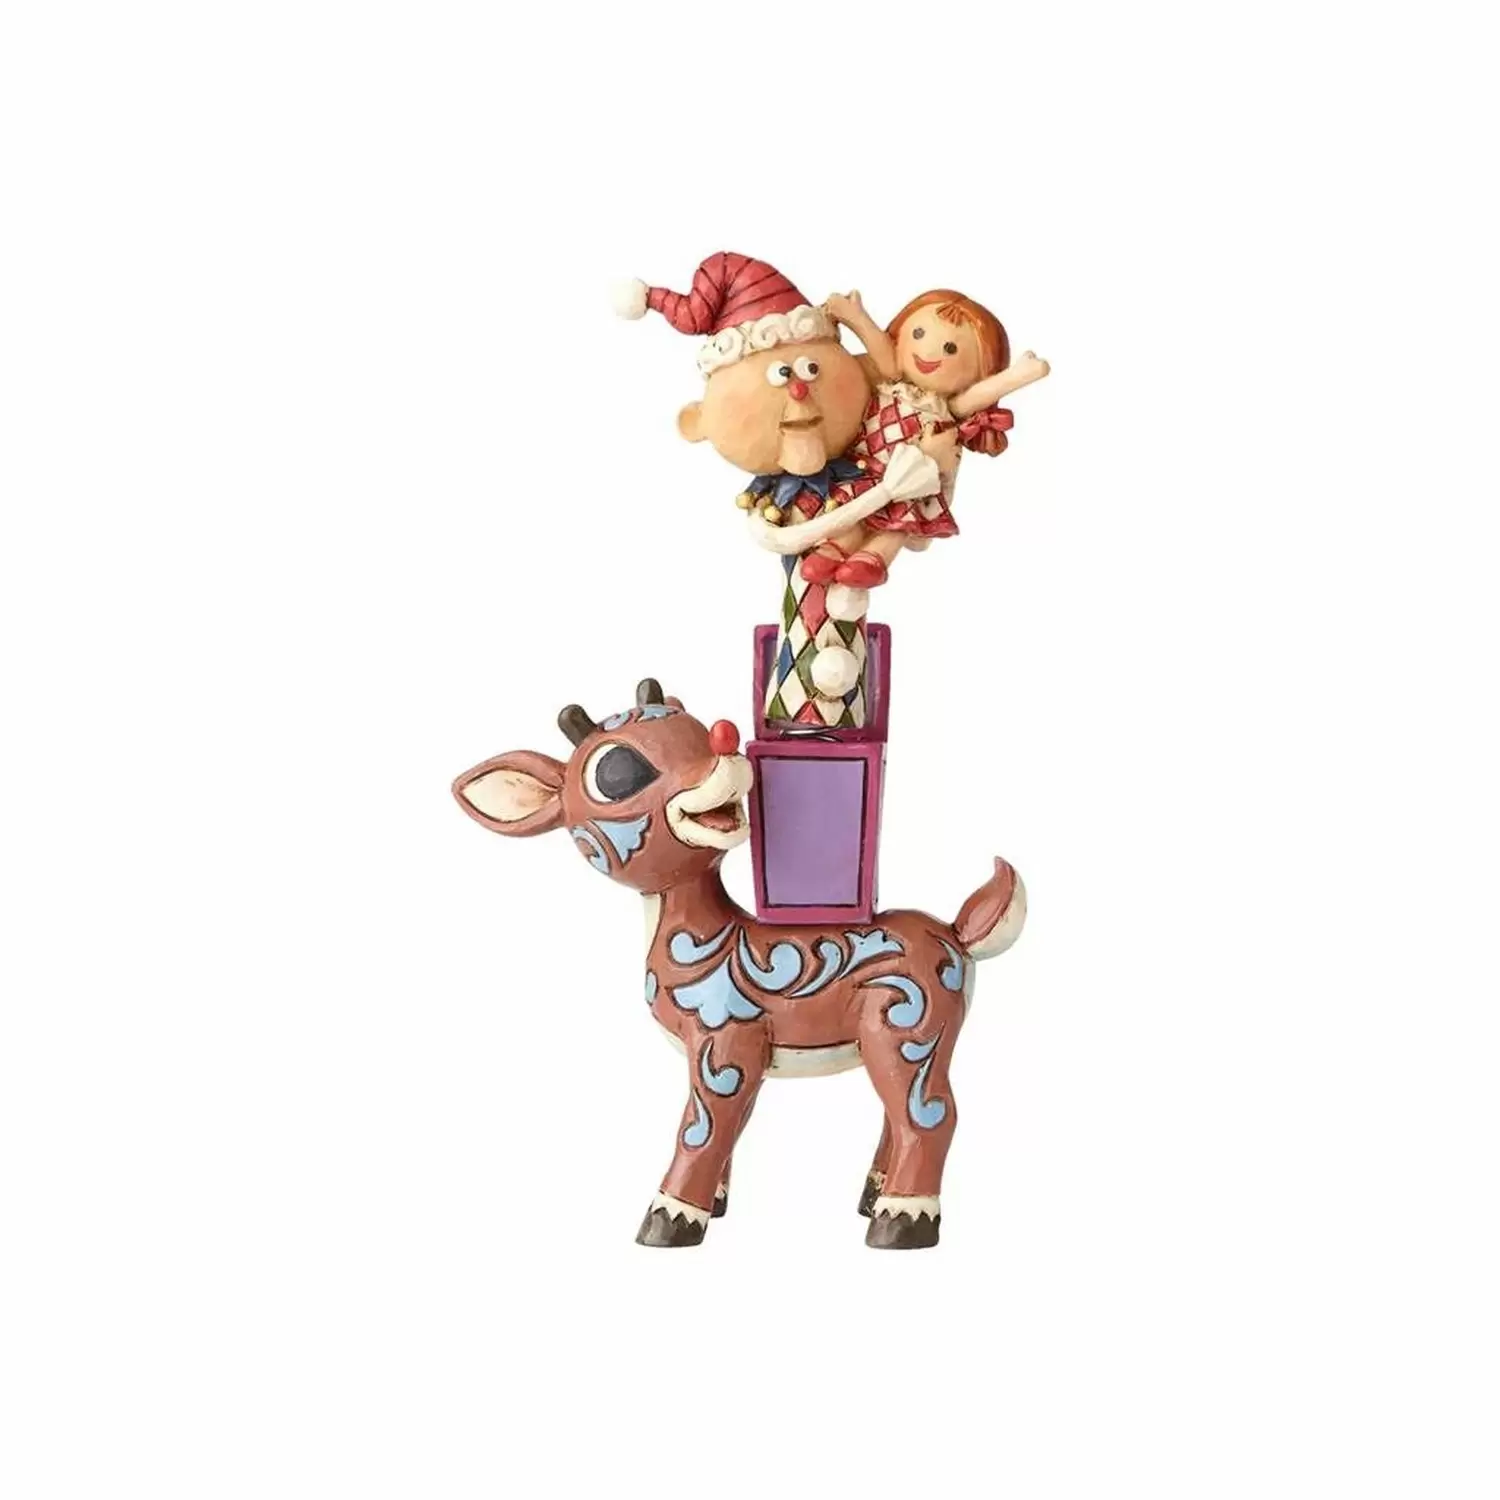 Cartoons  - Jim Shore - Rudolph with Misfit Toys